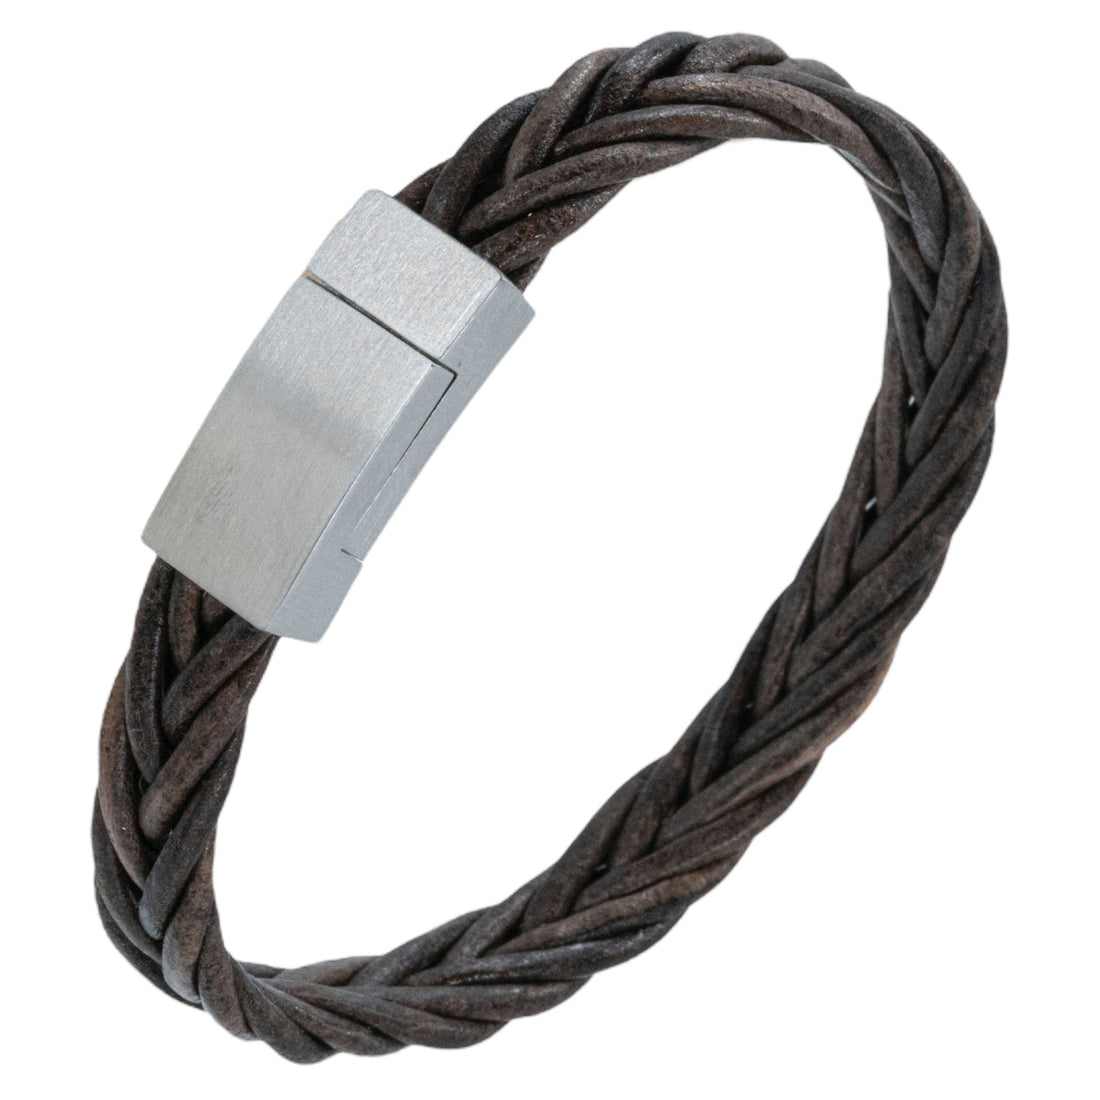 Small leather bracelet with engraved name - braided leather